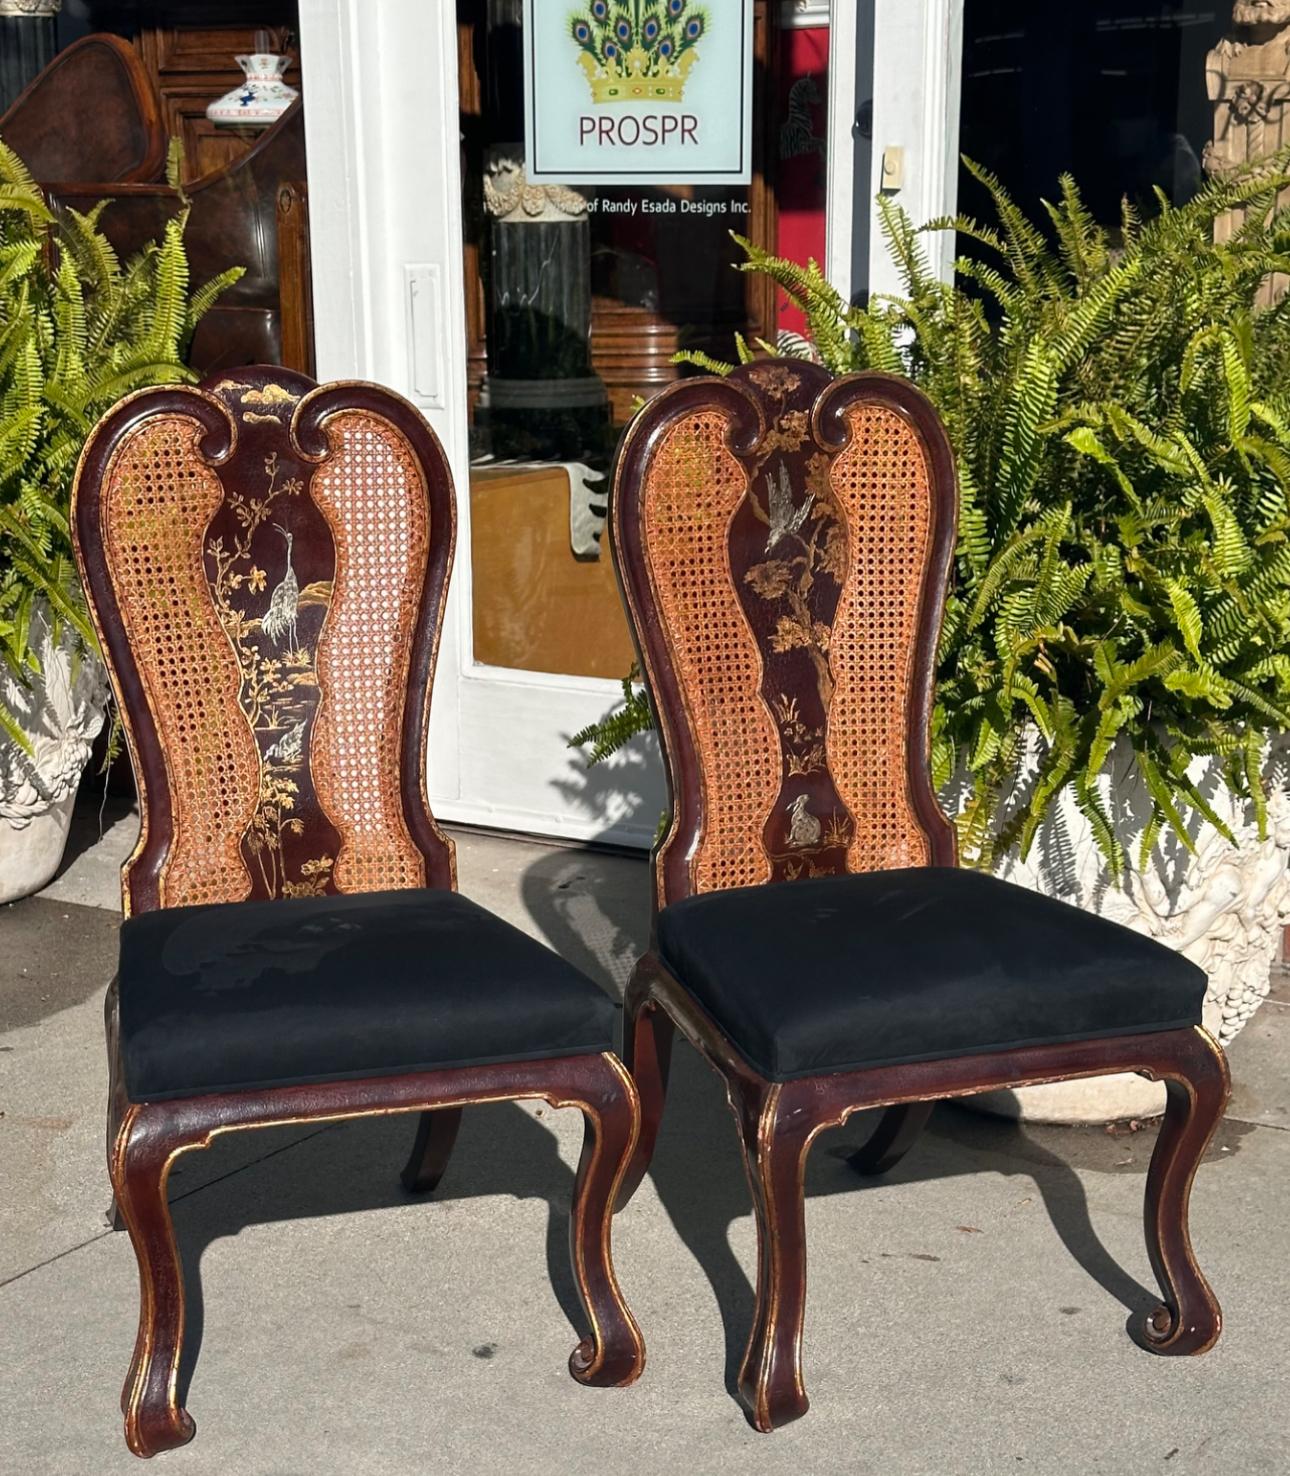 Lacquer Rose Tarlow Melrose House Chinoiserie Chairs - a Pair For Sale